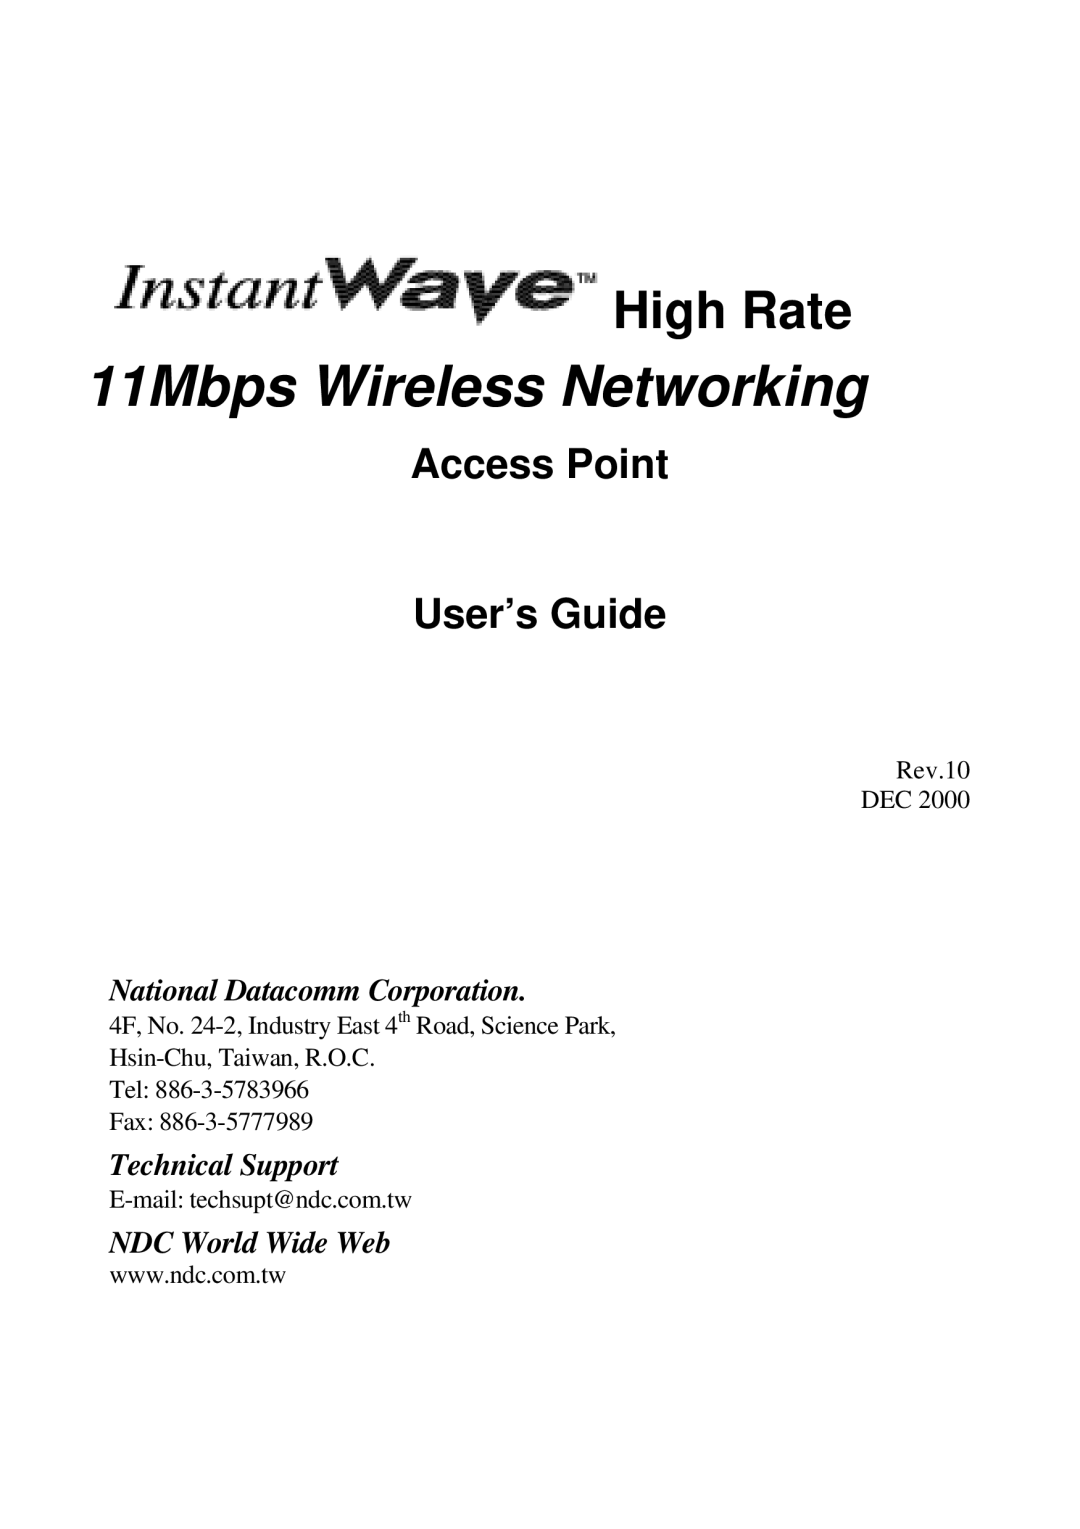 NDC comm Instant Wave manual 11Mbps Wireless Networking, Access Point User’s Guide 